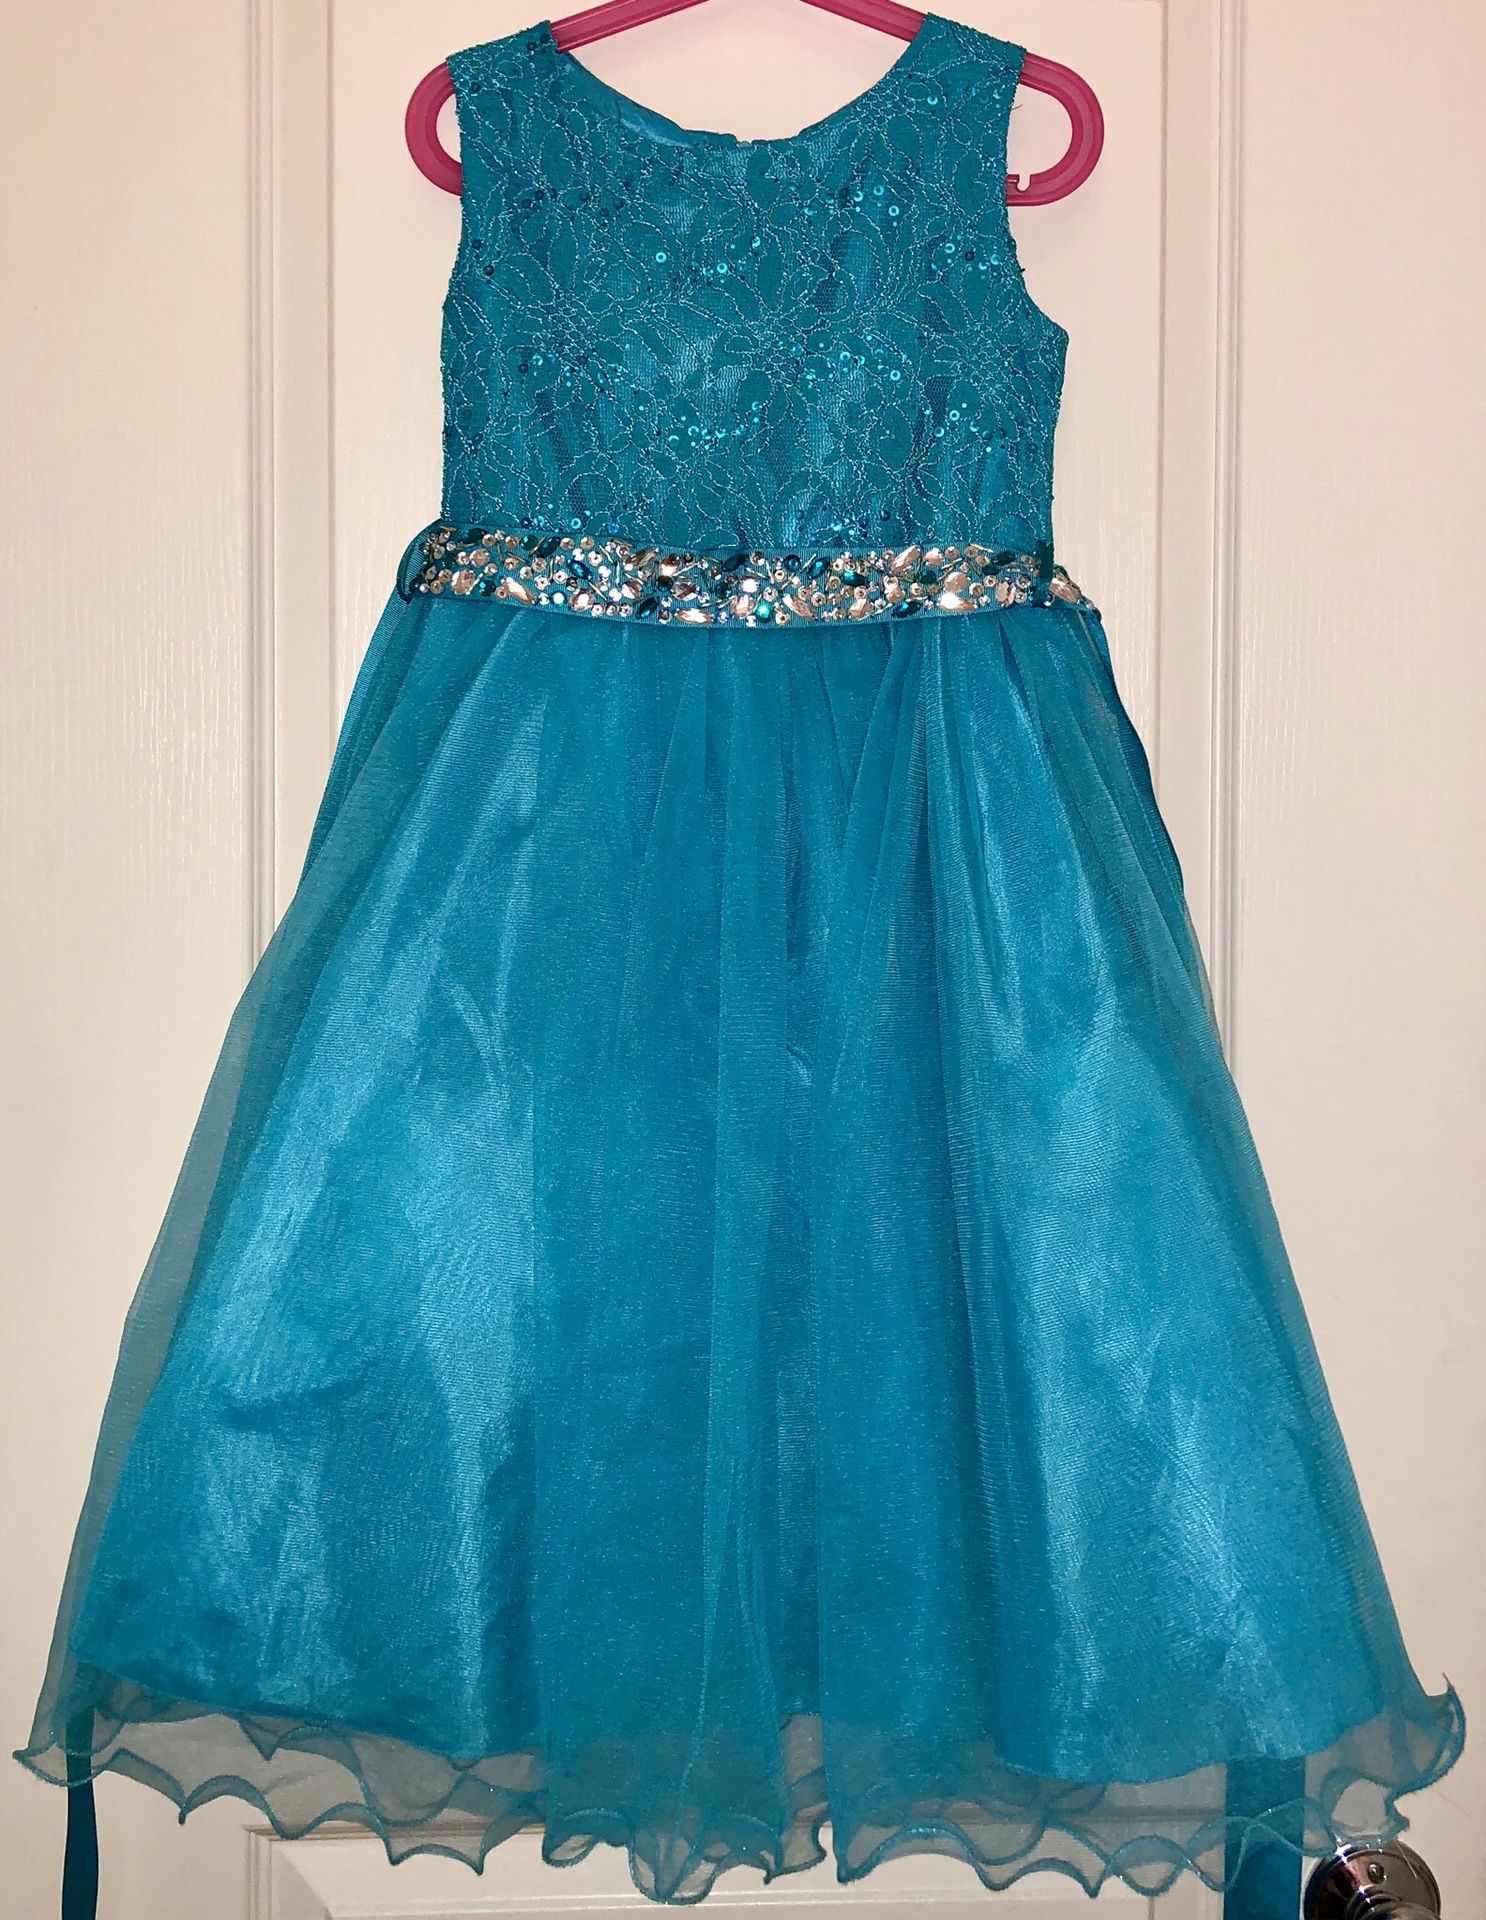 Teal Flower Girl Wedding Pageant Rattail Edge Tulle Dress, Size 6